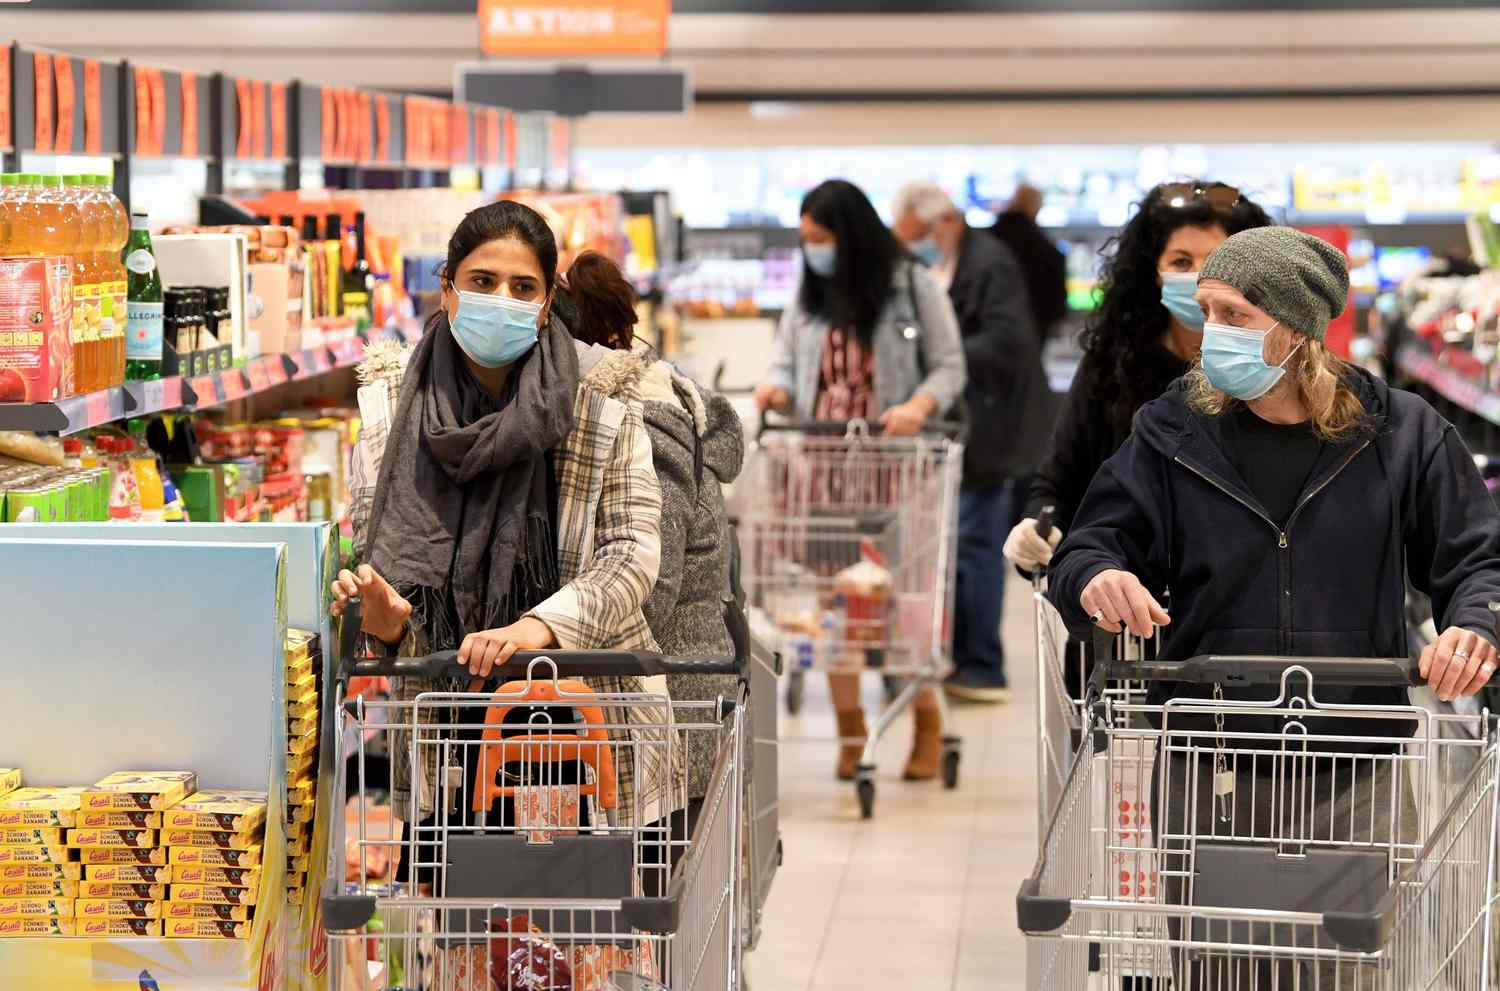 Customers wear face protection in a supermarket in Vienna on April 6, 2020. - As of today, April 6, 2020, it is mandatory in Austria to wear such protection in supermarkets with a sales area of 400 m2 or more. (Photo by ROLAND SCHLAGER / APA / AFP) / Austria OUT (Photo by ROLAND SCHLAGER/APA/AFP via Getty Images)